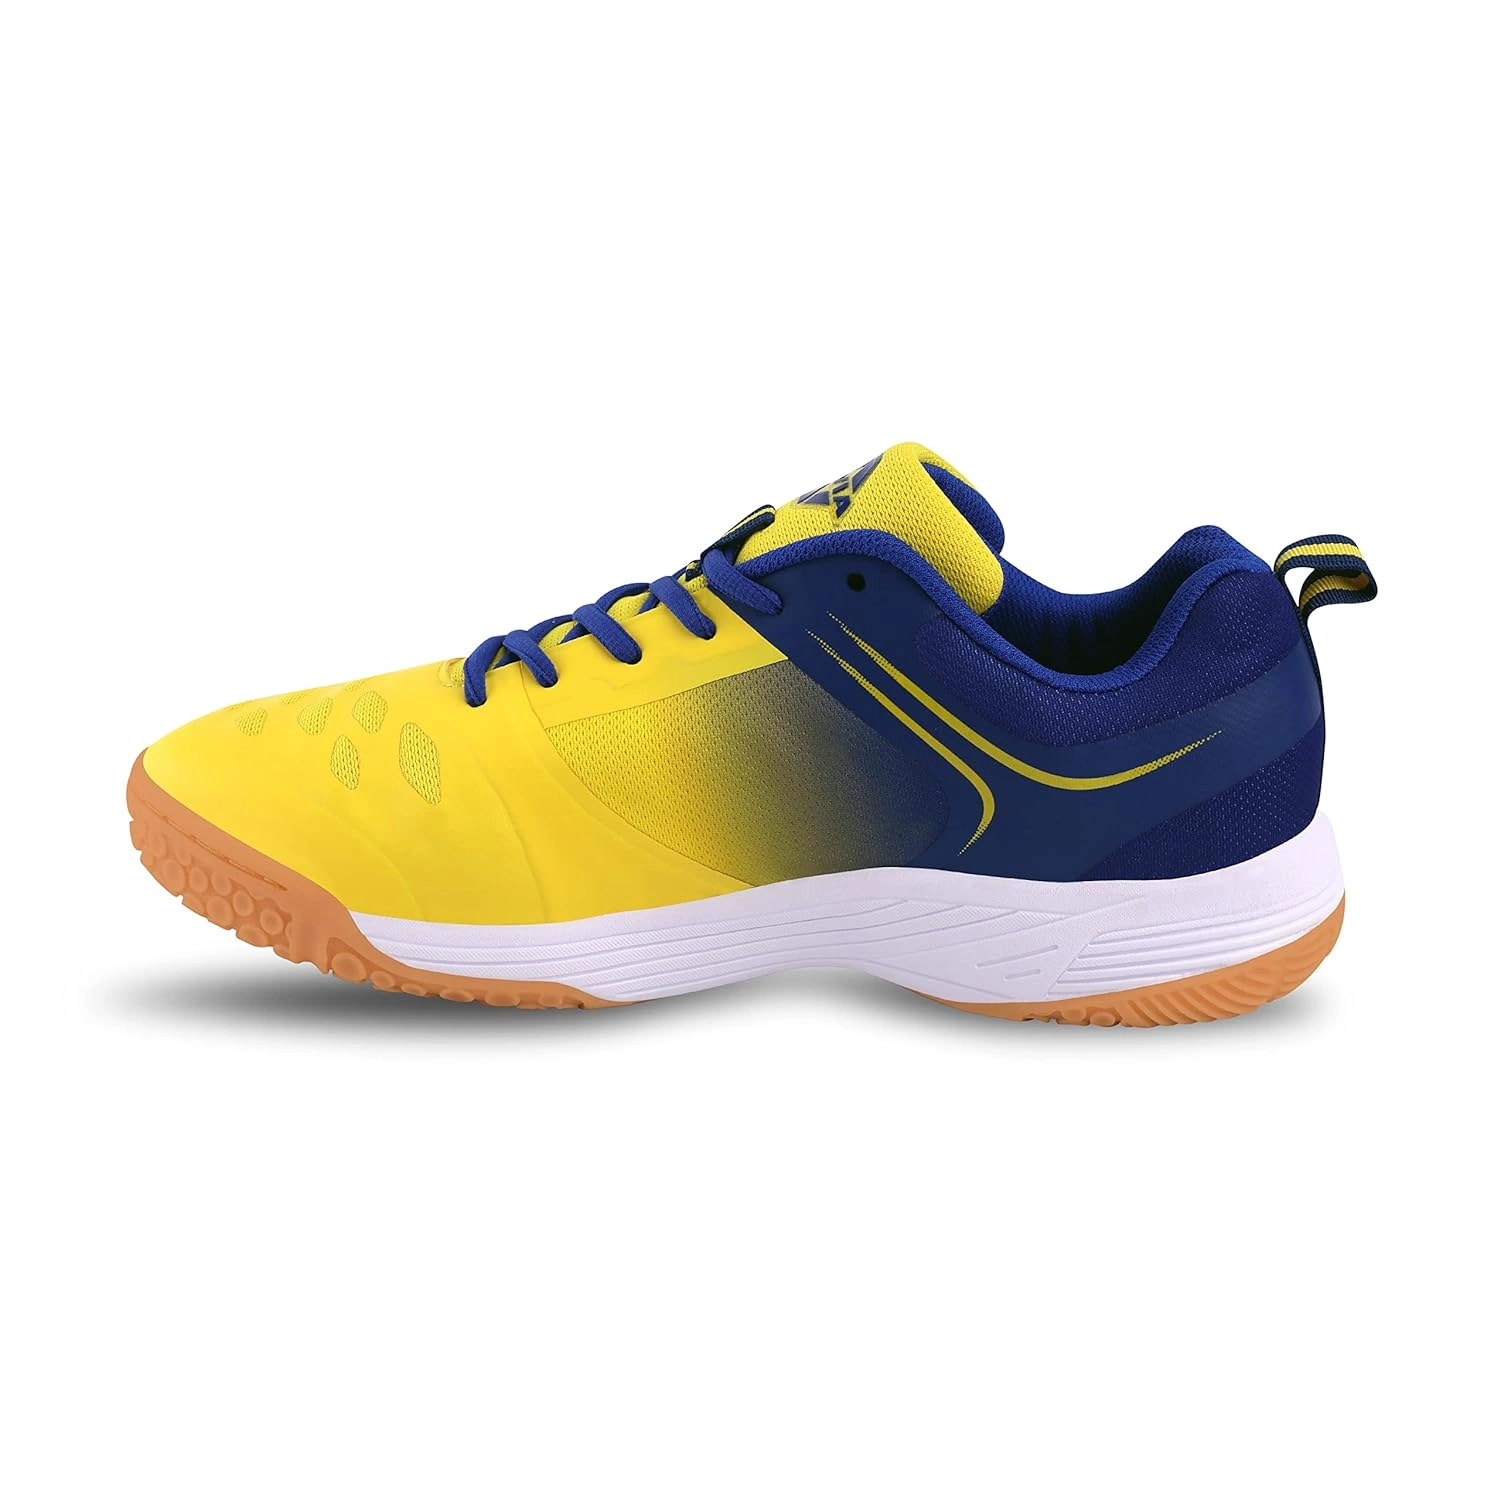 Nivia Hy-court 2.0 Badminton Shoes For Mens-52573